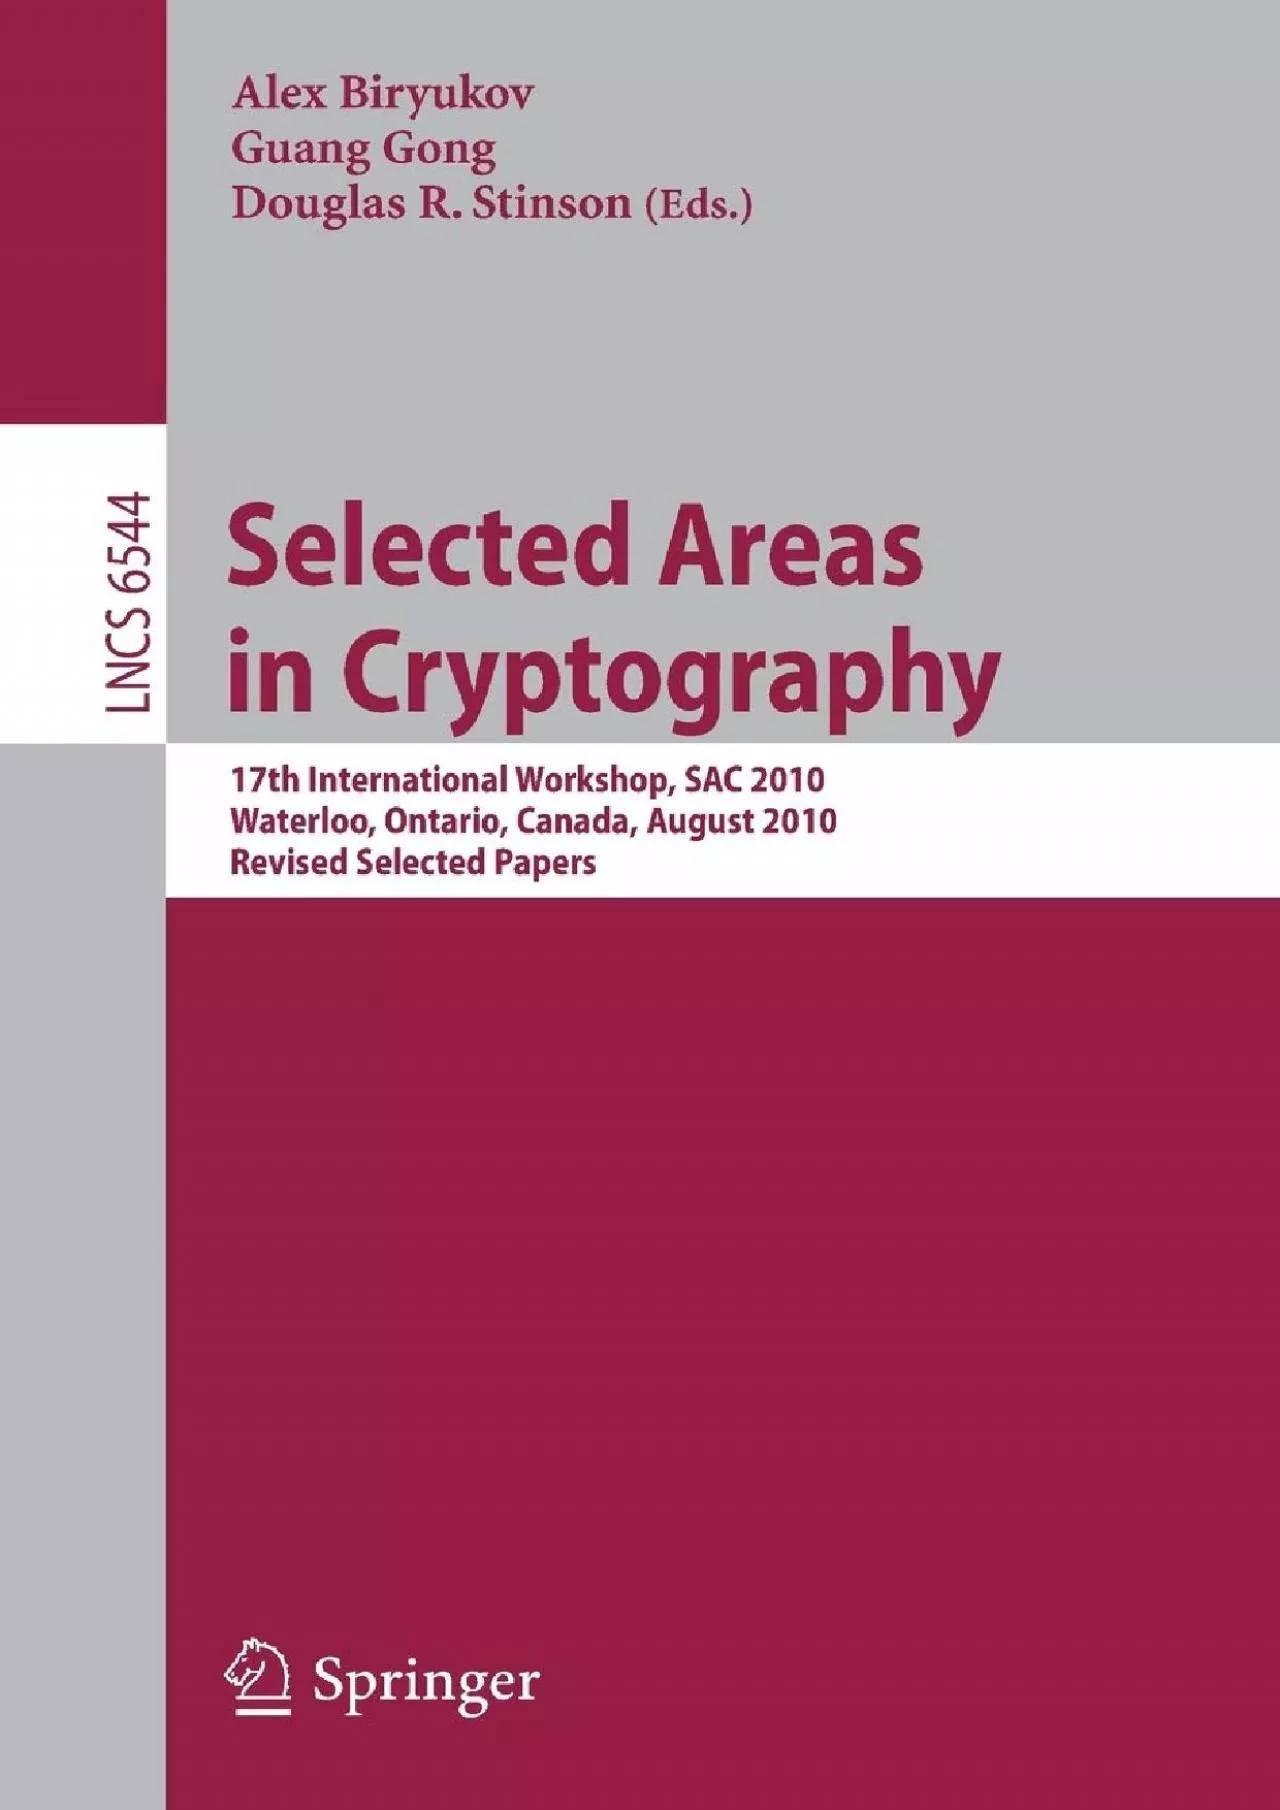 (BOOK)-Selected Areas in Cryptography: 17th International Workshop, SAC 2010, Waterloo,